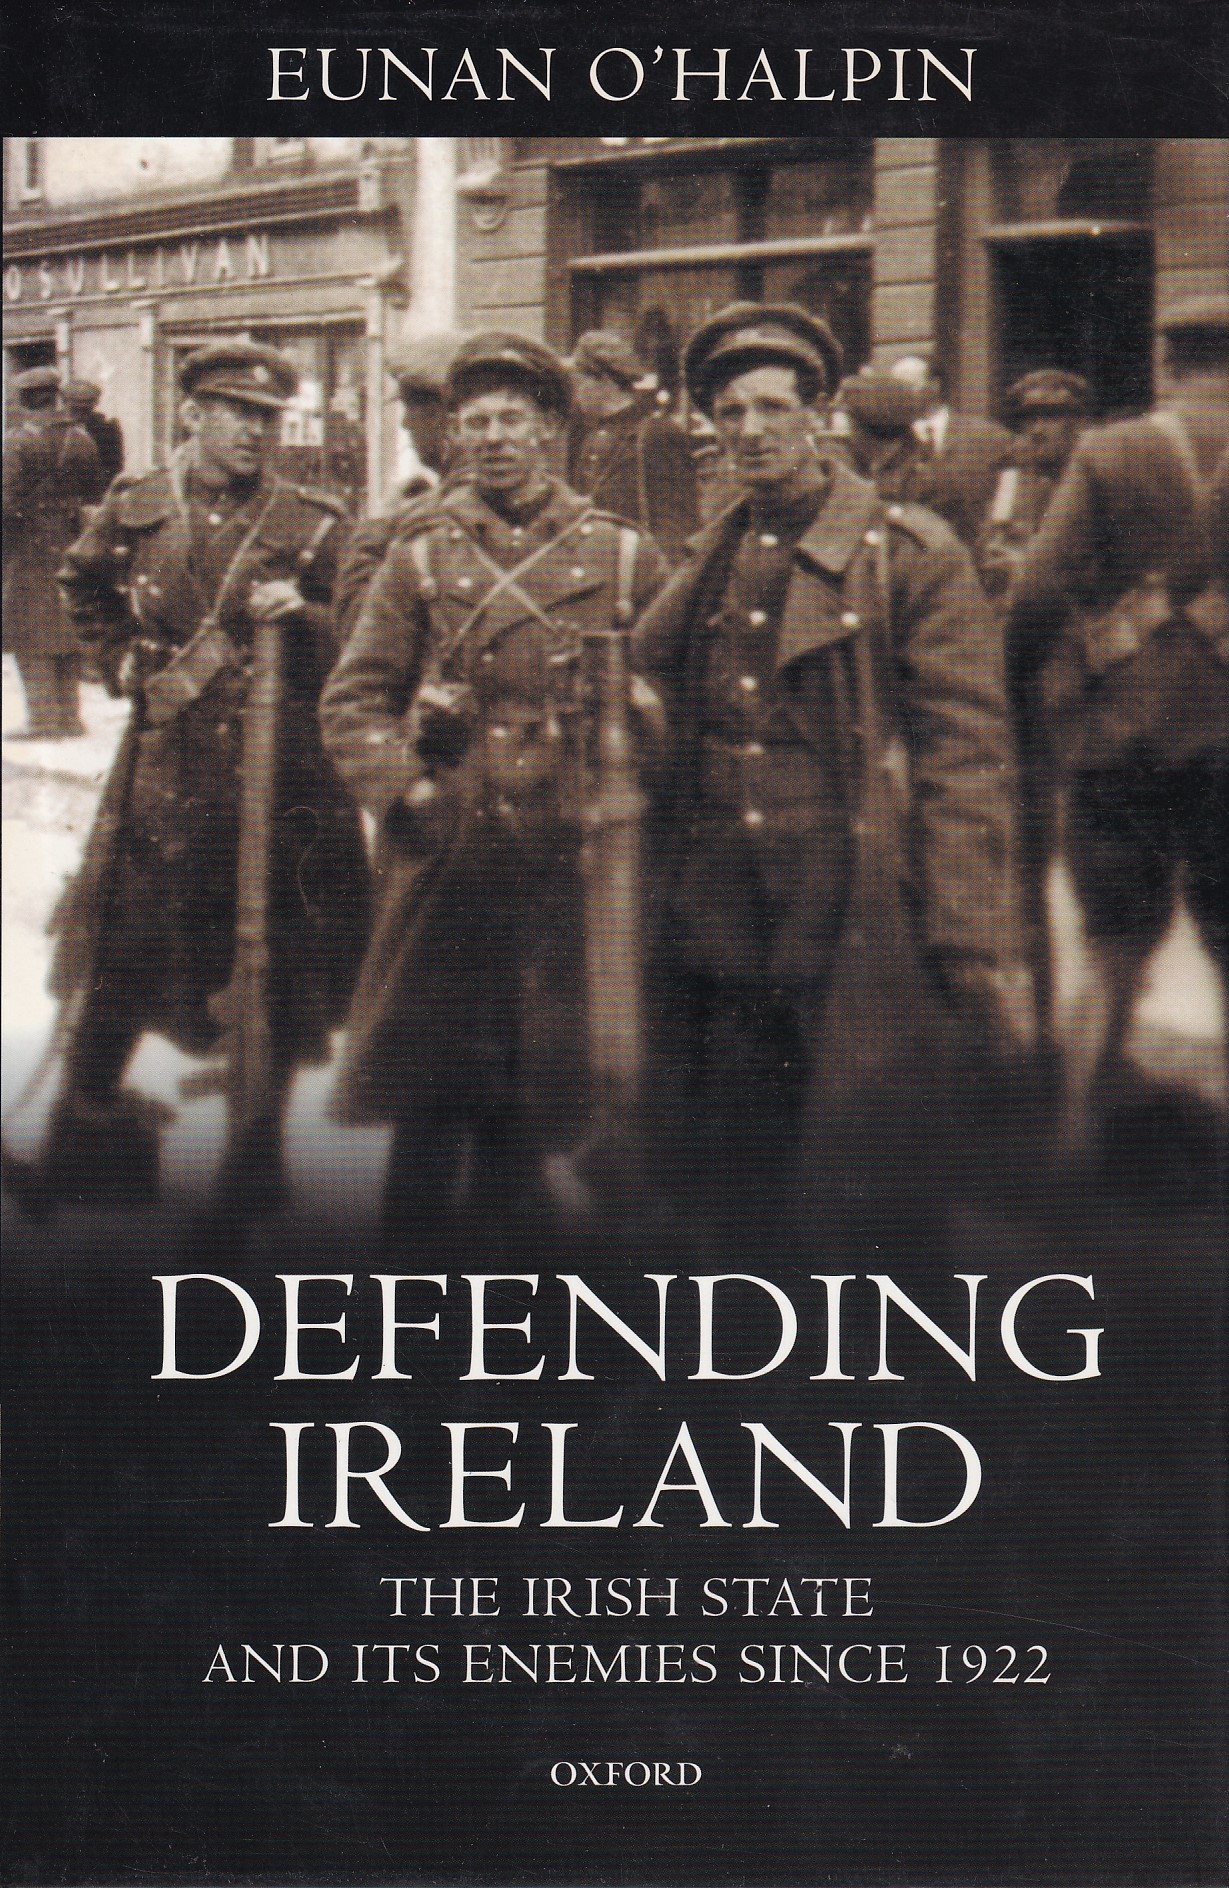 Defending Ireland: The Irish State and Its Enemies Since 1922 by Eunan O'Halpin